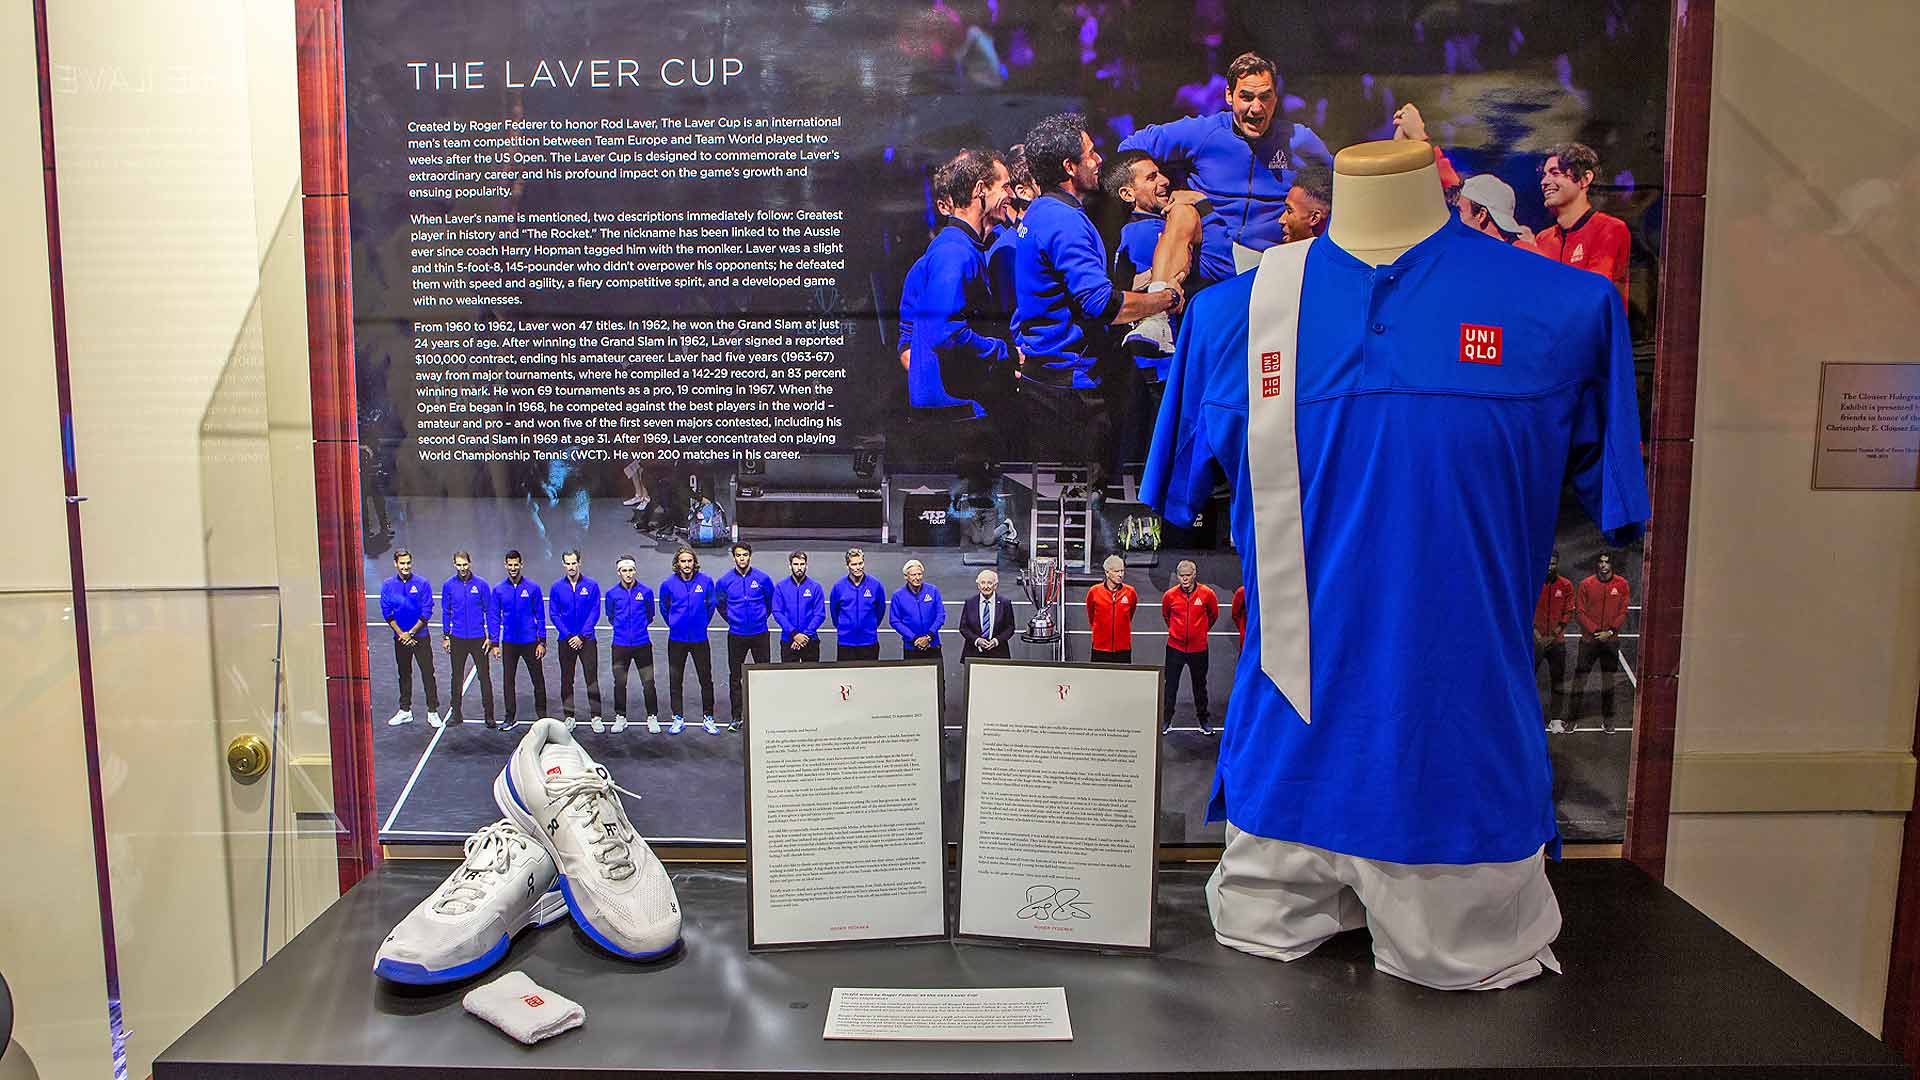 Roger Federer Lends Final Match Kit To International Tennis Hall Of Fame | Sports Opinion